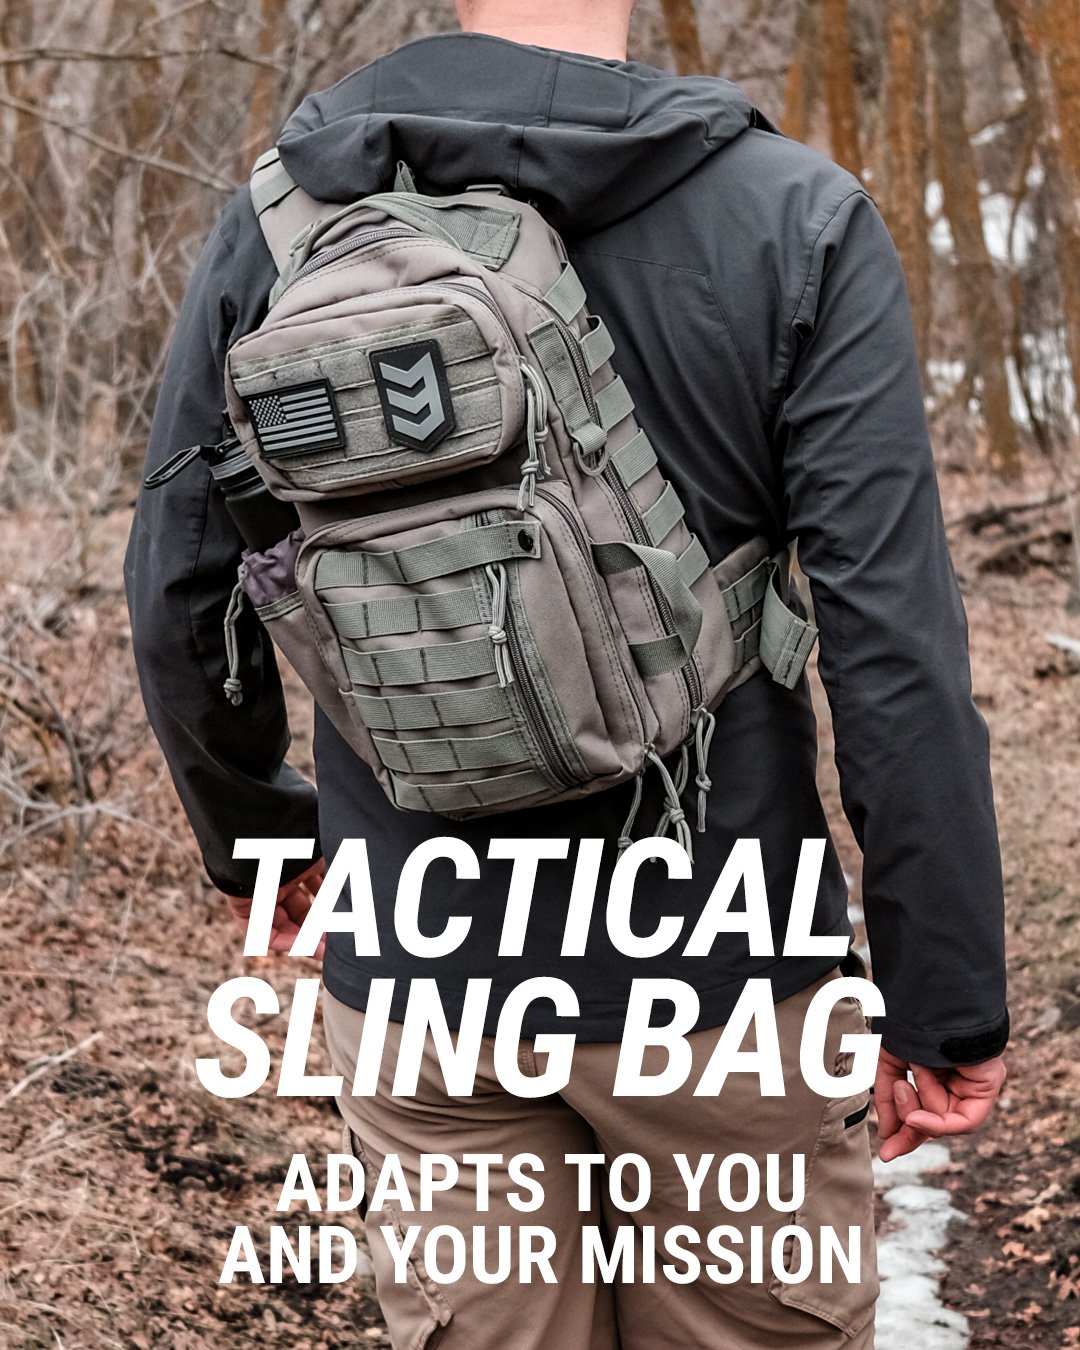 3v gear outlaw tactical edc sling pack